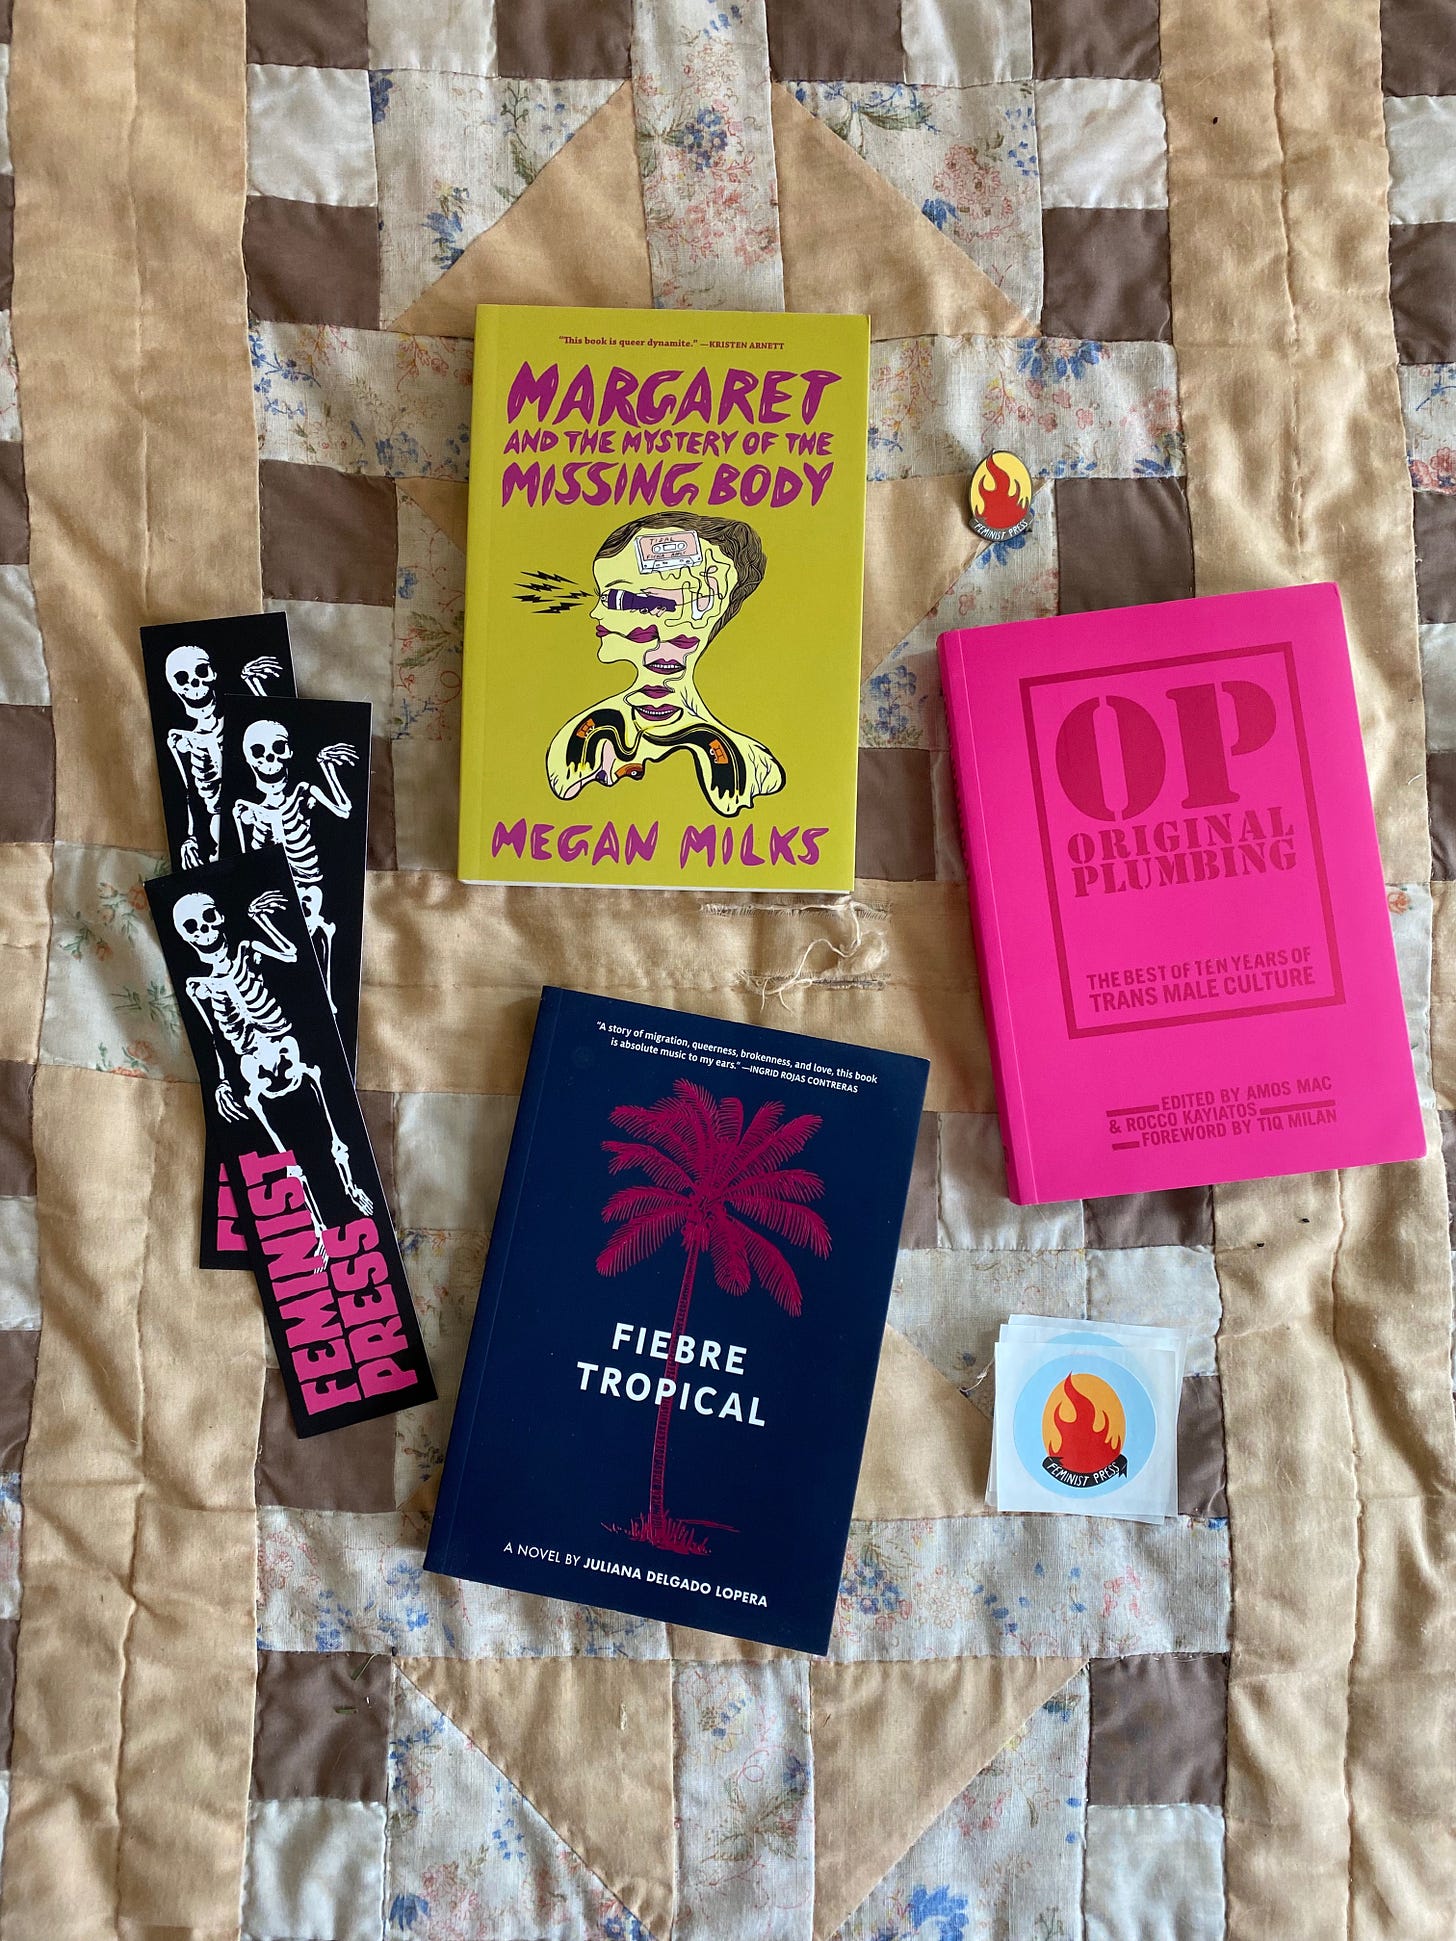 The three listed books arranged on a brown and tan quilt next to a small enamel pin with the Feminist Press logo and several black bookmarks with an illustration of a skeleton.